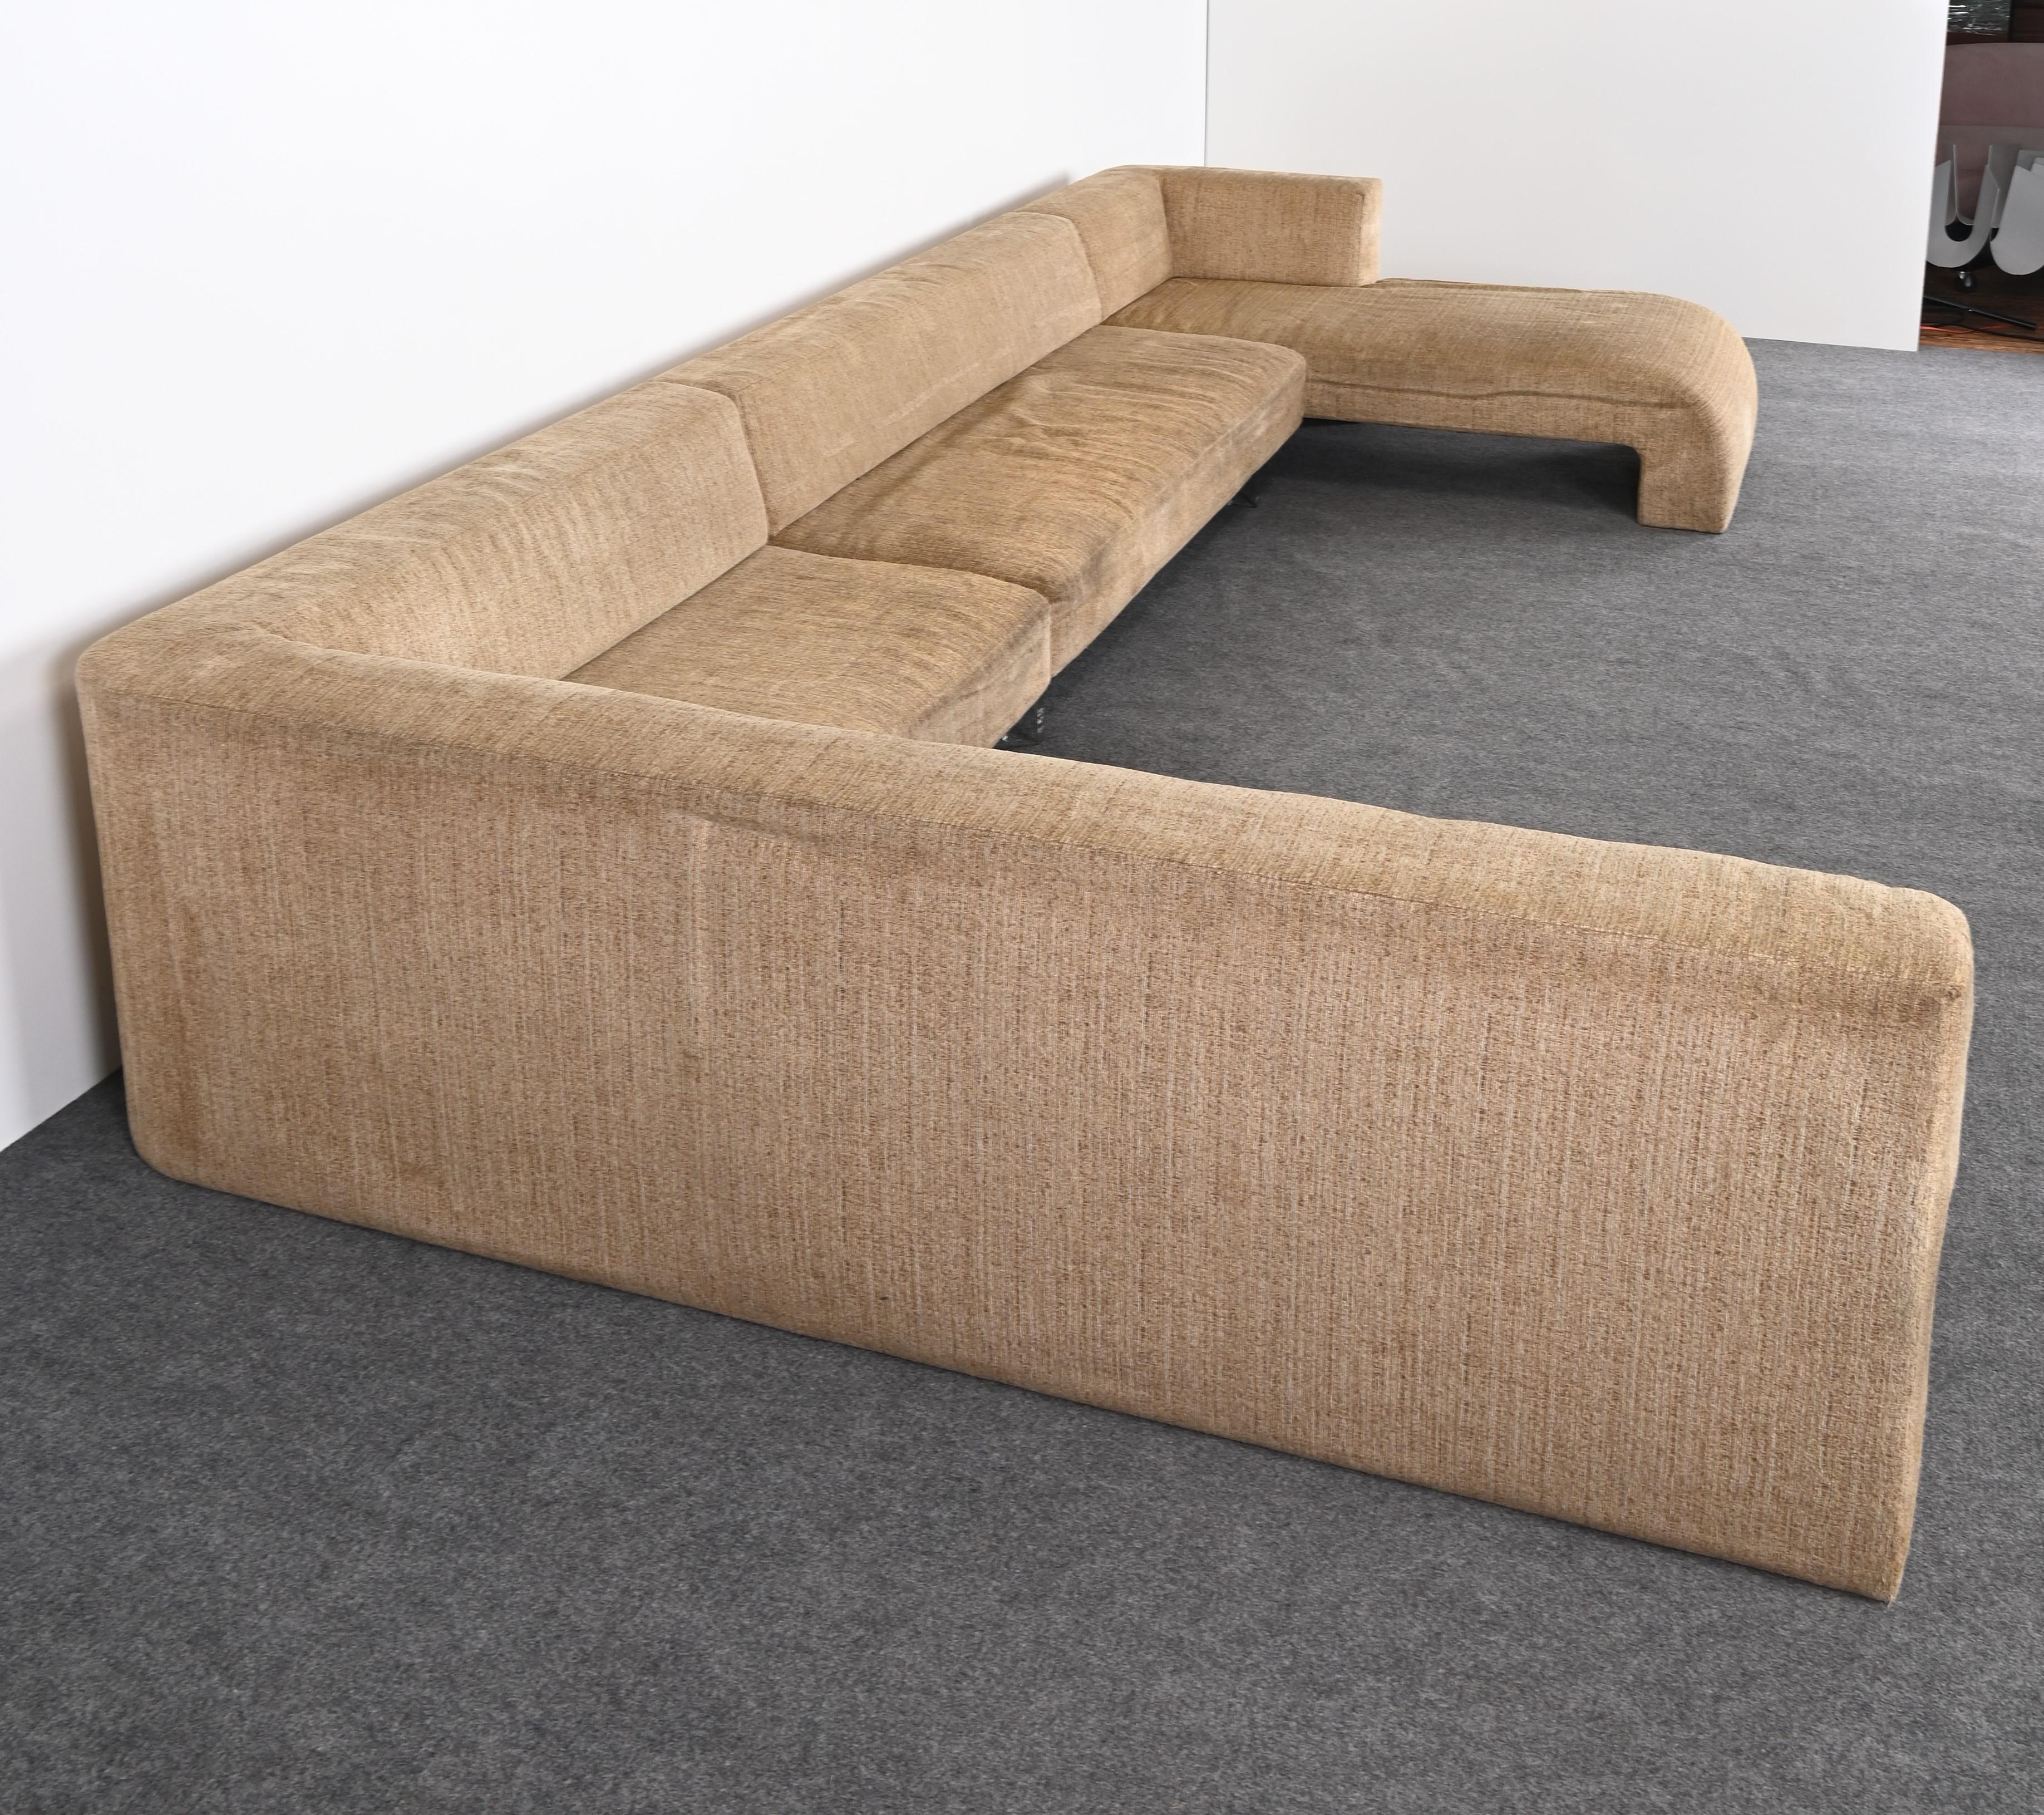 Monumental Sectional Sofa Designed by Vladimir Kagan, 1970s For Sale 7